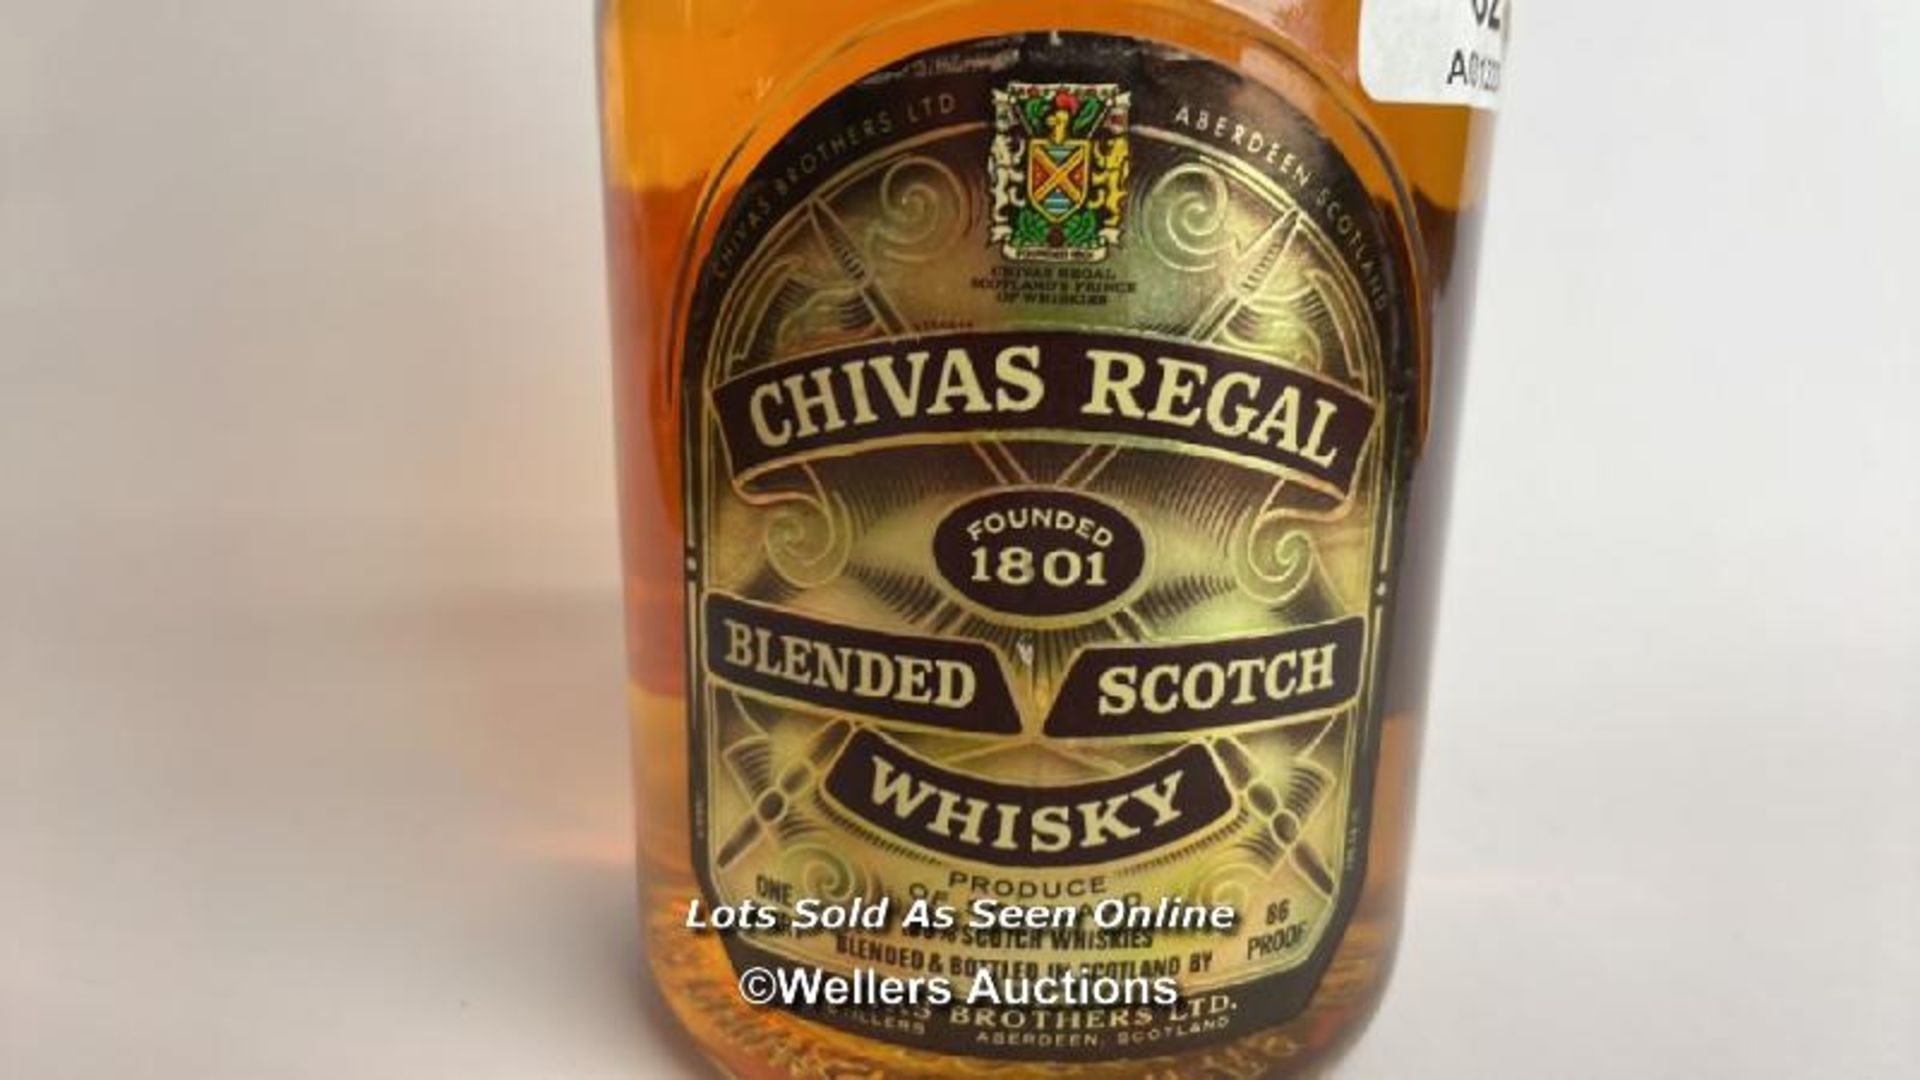 Chivas Regal Blended Scotch Whisky, Aged 12 years, 1L, 86 Proof / Please see images for fill level - Image 2 of 6